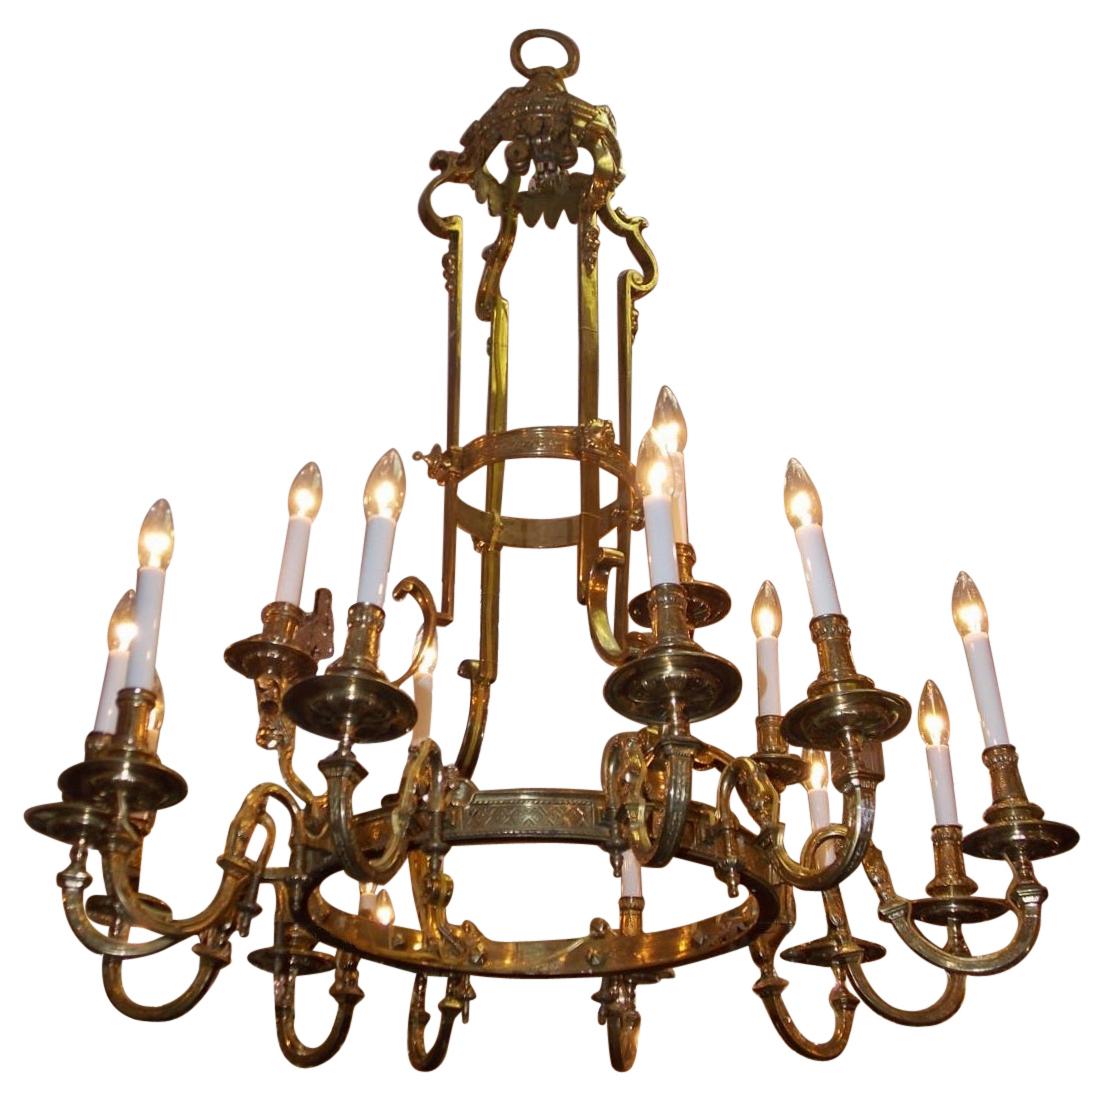 French Bronze Figural & Foliage Two-Tiered Sixteen Light Chandelier, Circa 1830